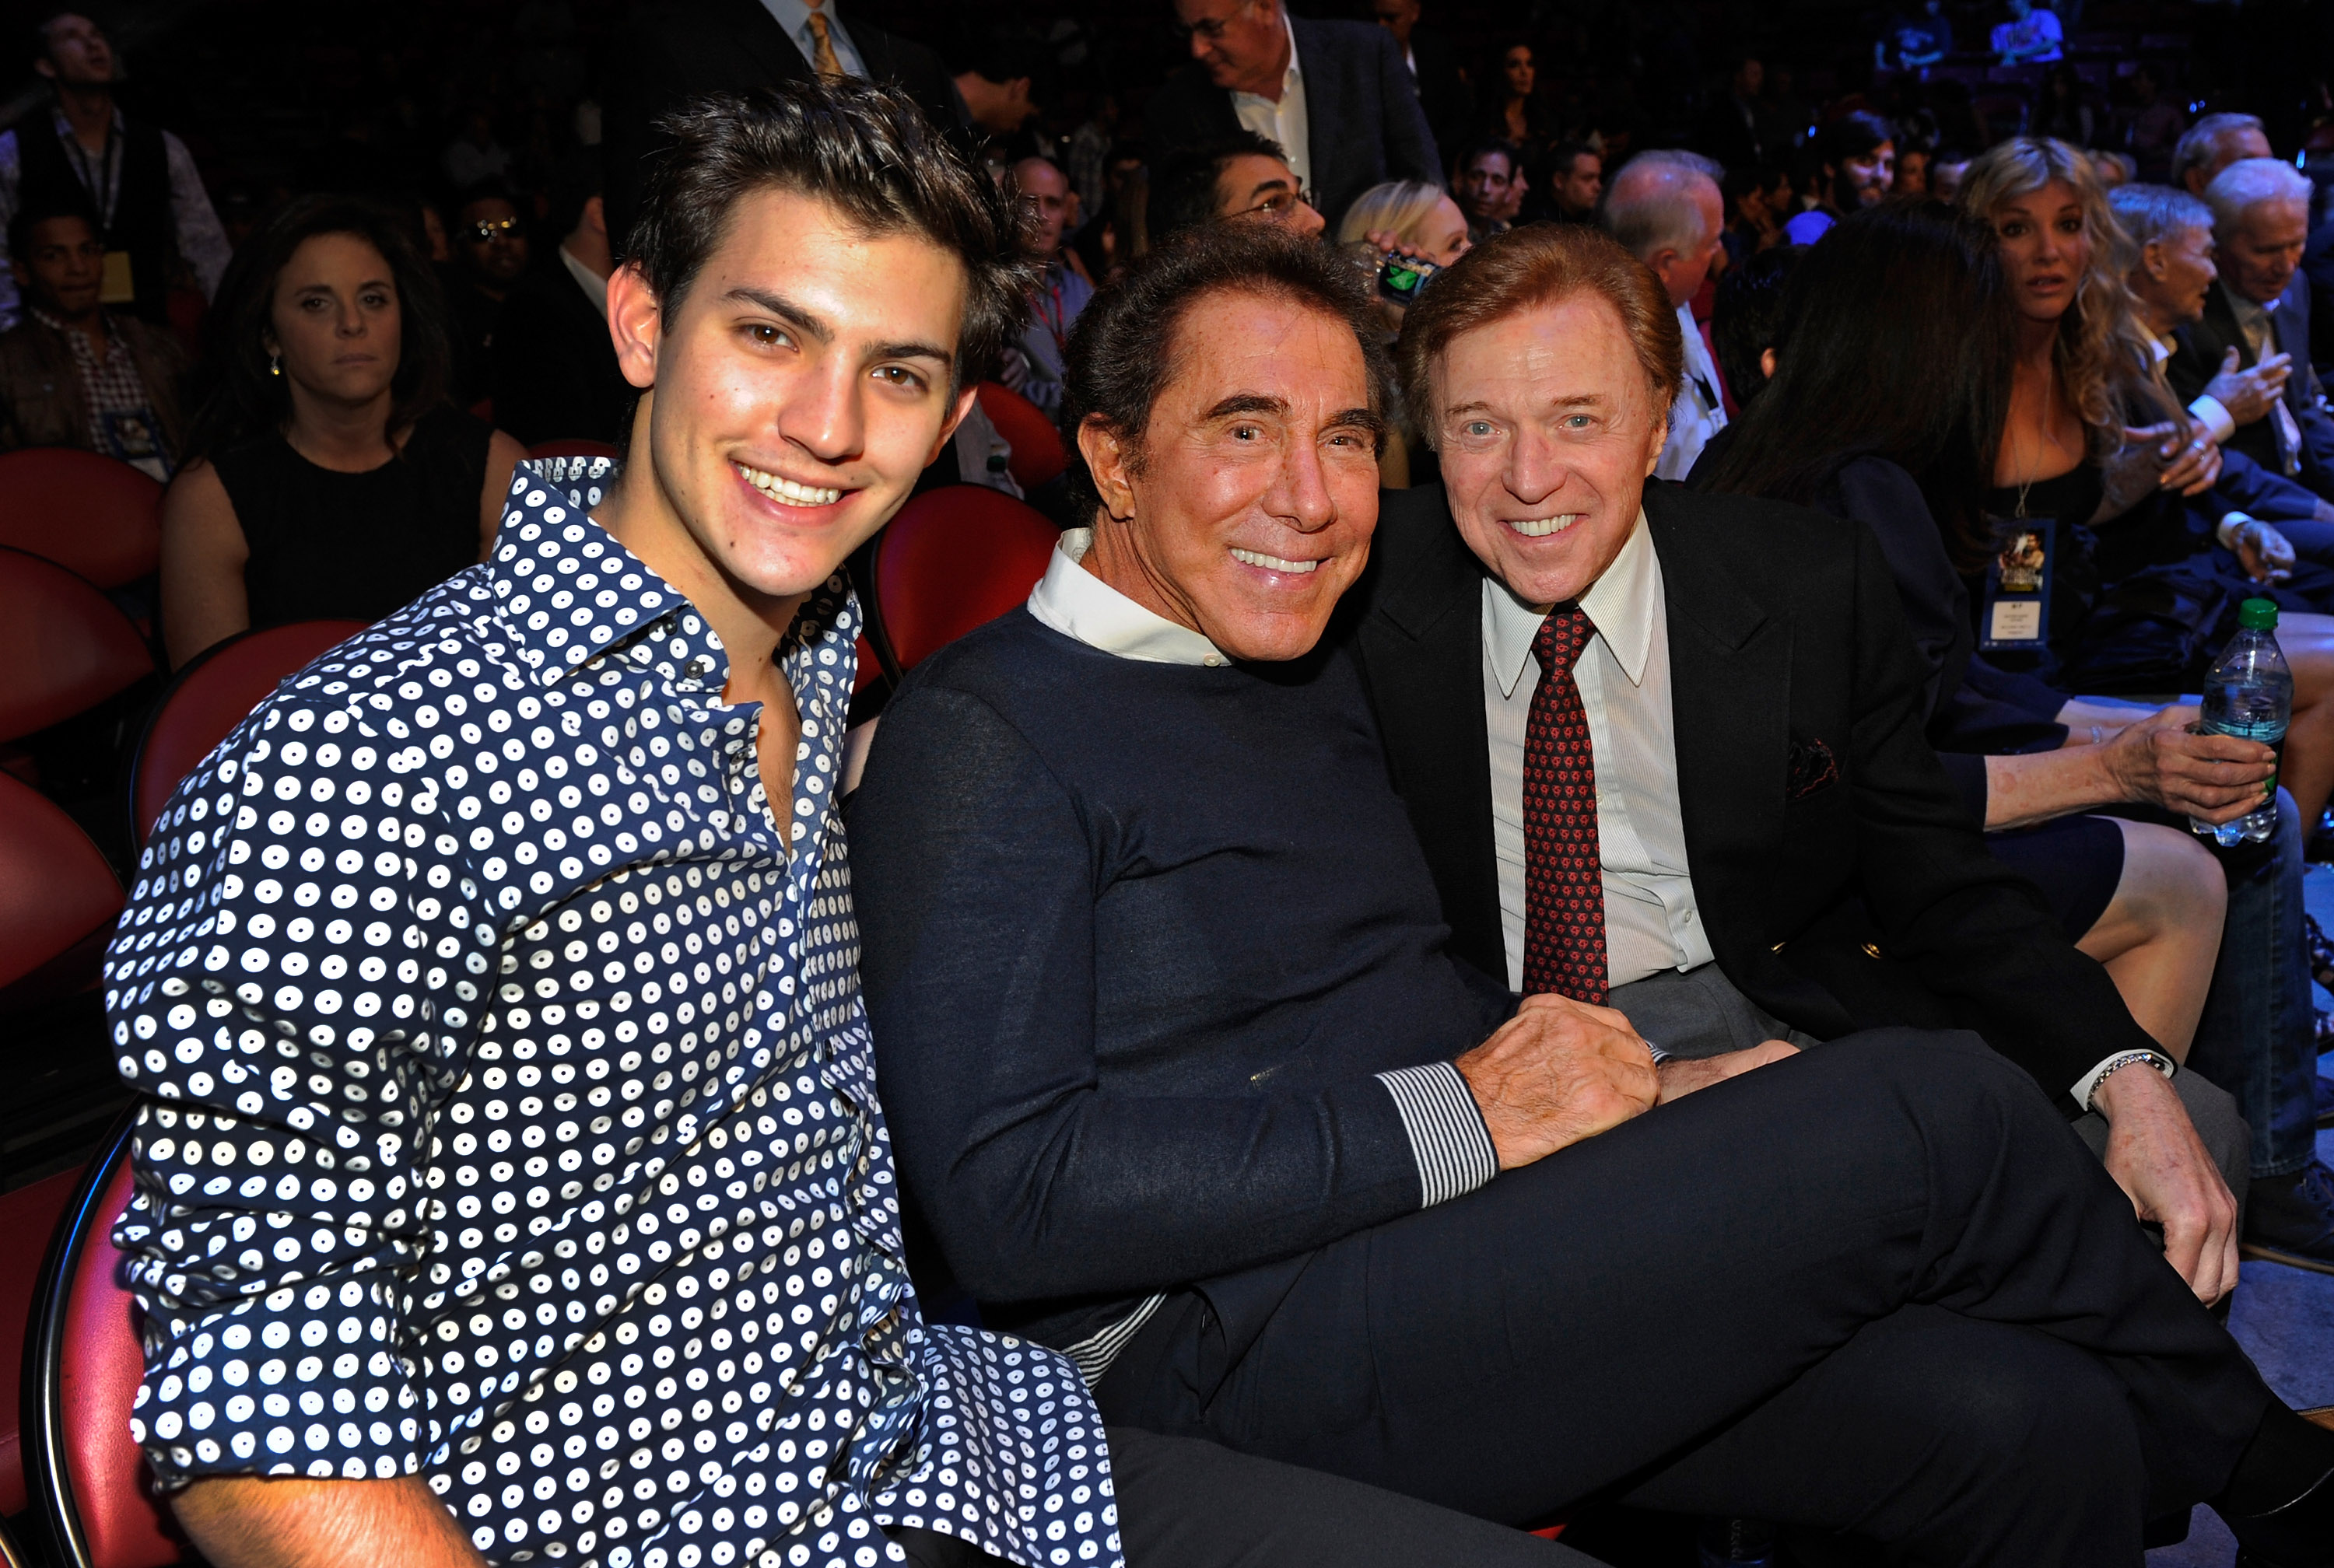 Nick Hissom, Steve Wynn and Steve Lawrence during the Bradley vs. Marquez fight co-sponsored by the Wynn Las Vegas at the Thomas & Mack Center on October 12, 2013, in Las Vegas, Nevada. | Source: Getty Images